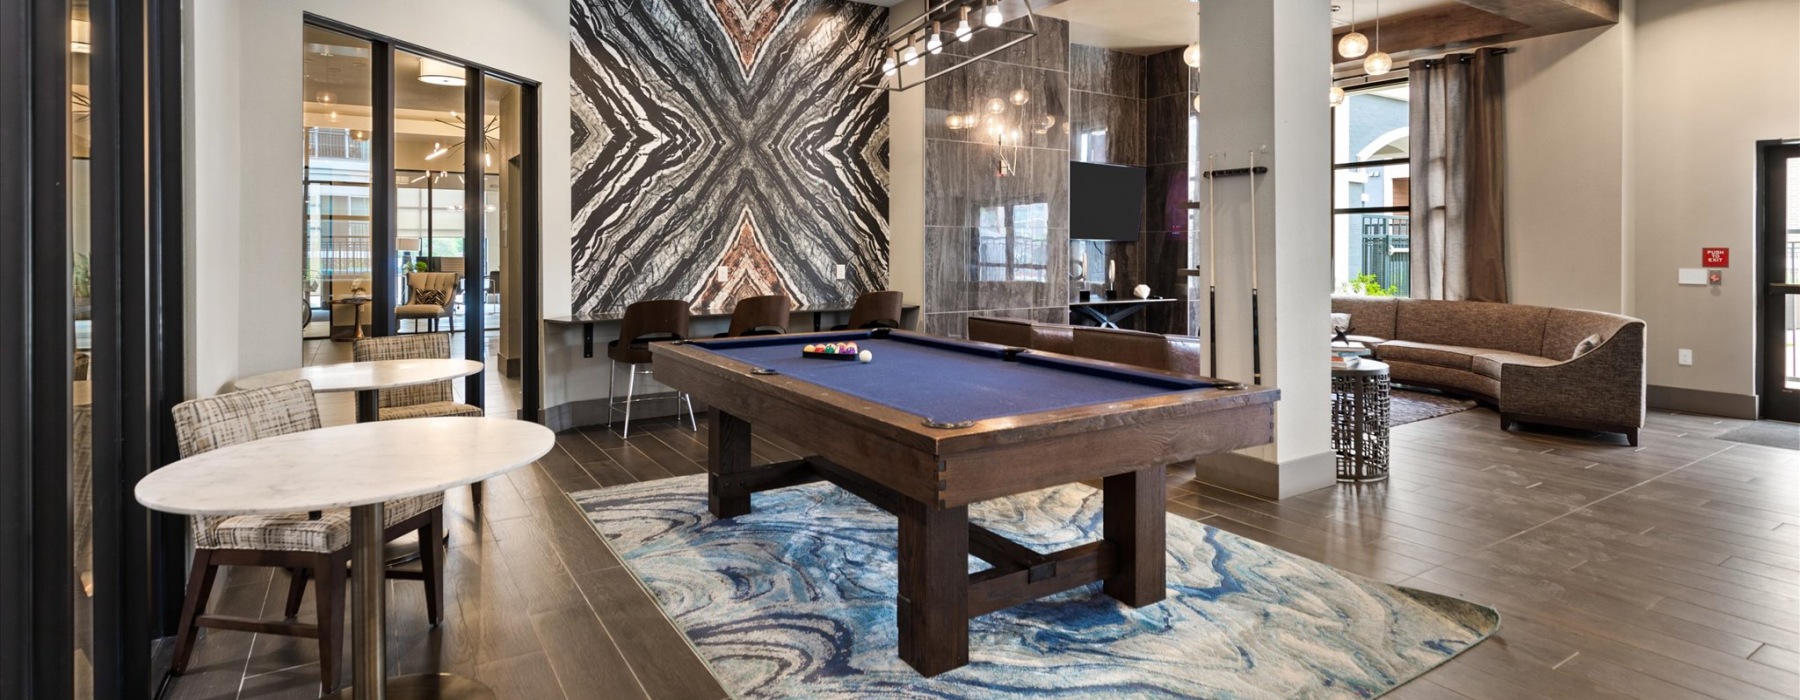 Spacious game room with wood floors and a large billiards table